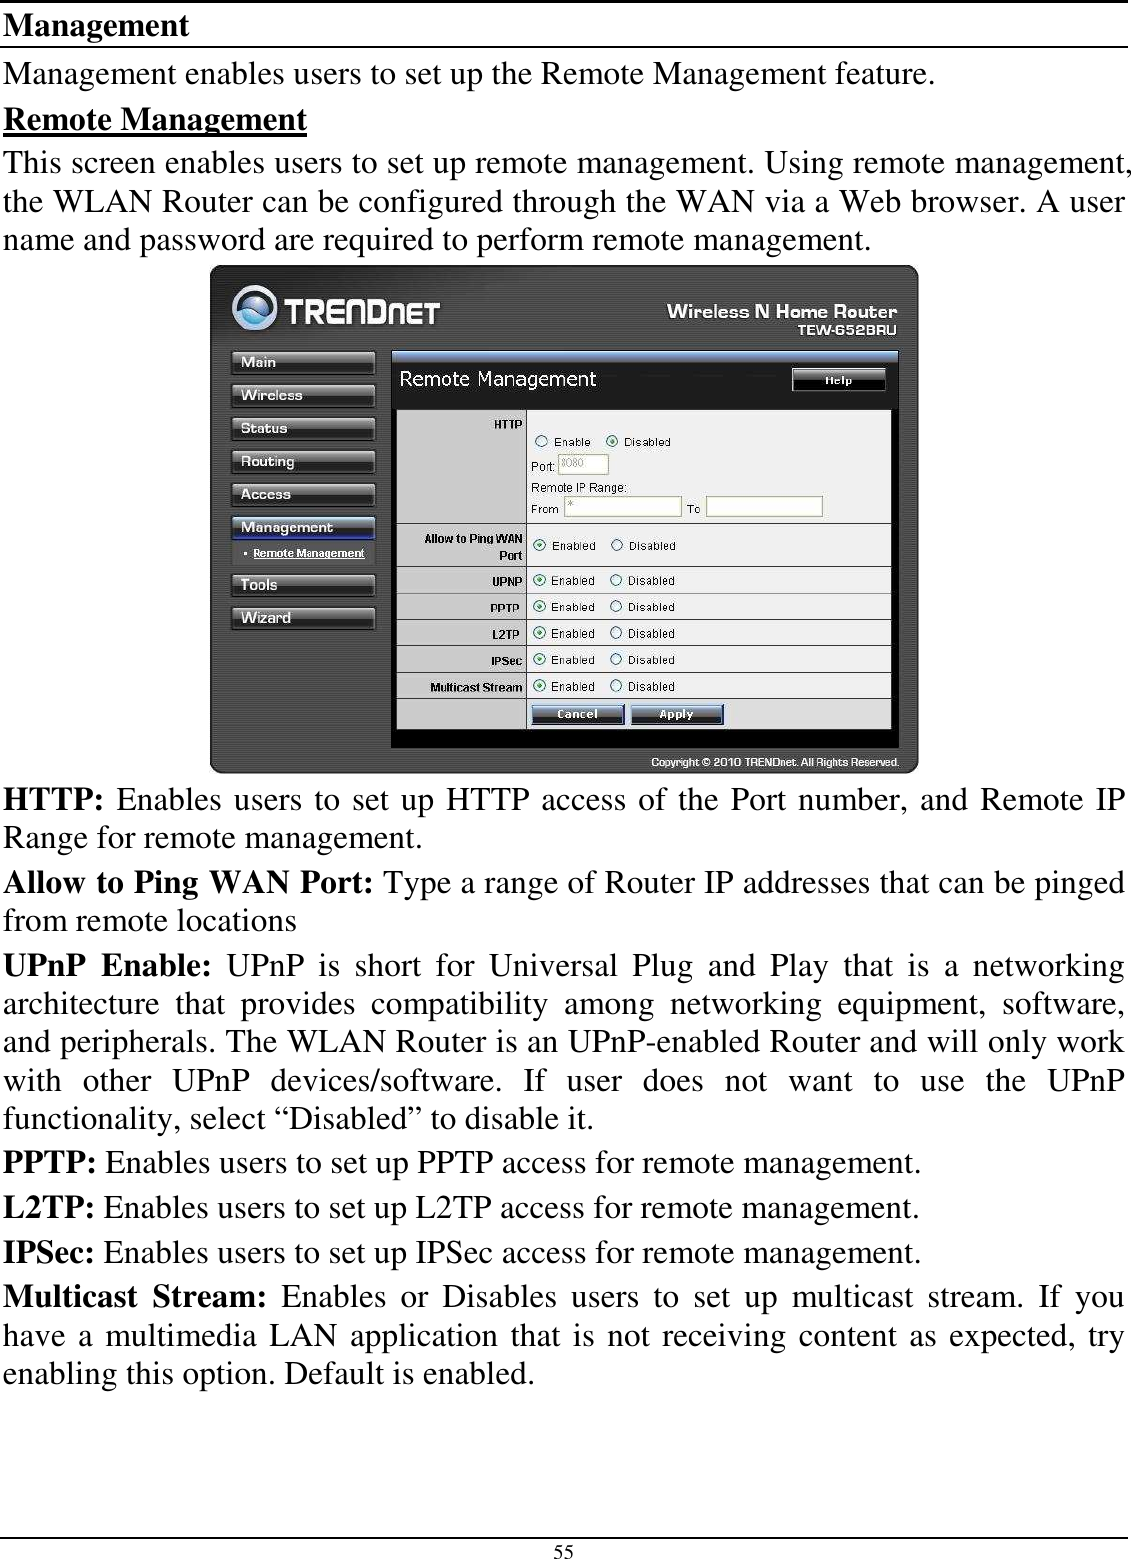 55 Management Management enables users to set up the Remote Management feature. Remote Management This screen enables users to set up remote management. Using remote management, the WLAN Router can be configured through the WAN via a Web browser. A user name and password are required to perform remote management.  HTTP: Enables users to set up HTTP access of the Port number, and Remote IP Range for remote management. Allow to Ping WAN Port: Type a range of Router IP addresses that can be pinged from remote locations UPnP  Enable:  UPnP  is  short  for  Universal  Plug  and  Play  that  is  a  networking architecture  that  provides  compatibility  among  networking  equipment,  software, and peripherals. The WLAN Router is an UPnP-enabled Router and will only work with  other  UPnP  devices/software.  If  user  does  not  want  to  use  the  UPnP functionality, select “Disabled” to disable it. PPTP: Enables users to set up PPTP access for remote management. L2TP: Enables users to set up L2TP access for remote management. IPSec: Enables users to set up IPSec access for remote management. Multicast  Stream:  Enables  or  Disables  users  to  set  up  multicast  stream.  If  you have a multimedia LAN application that is not receiving content as expected, try enabling this option. Default is enabled. 